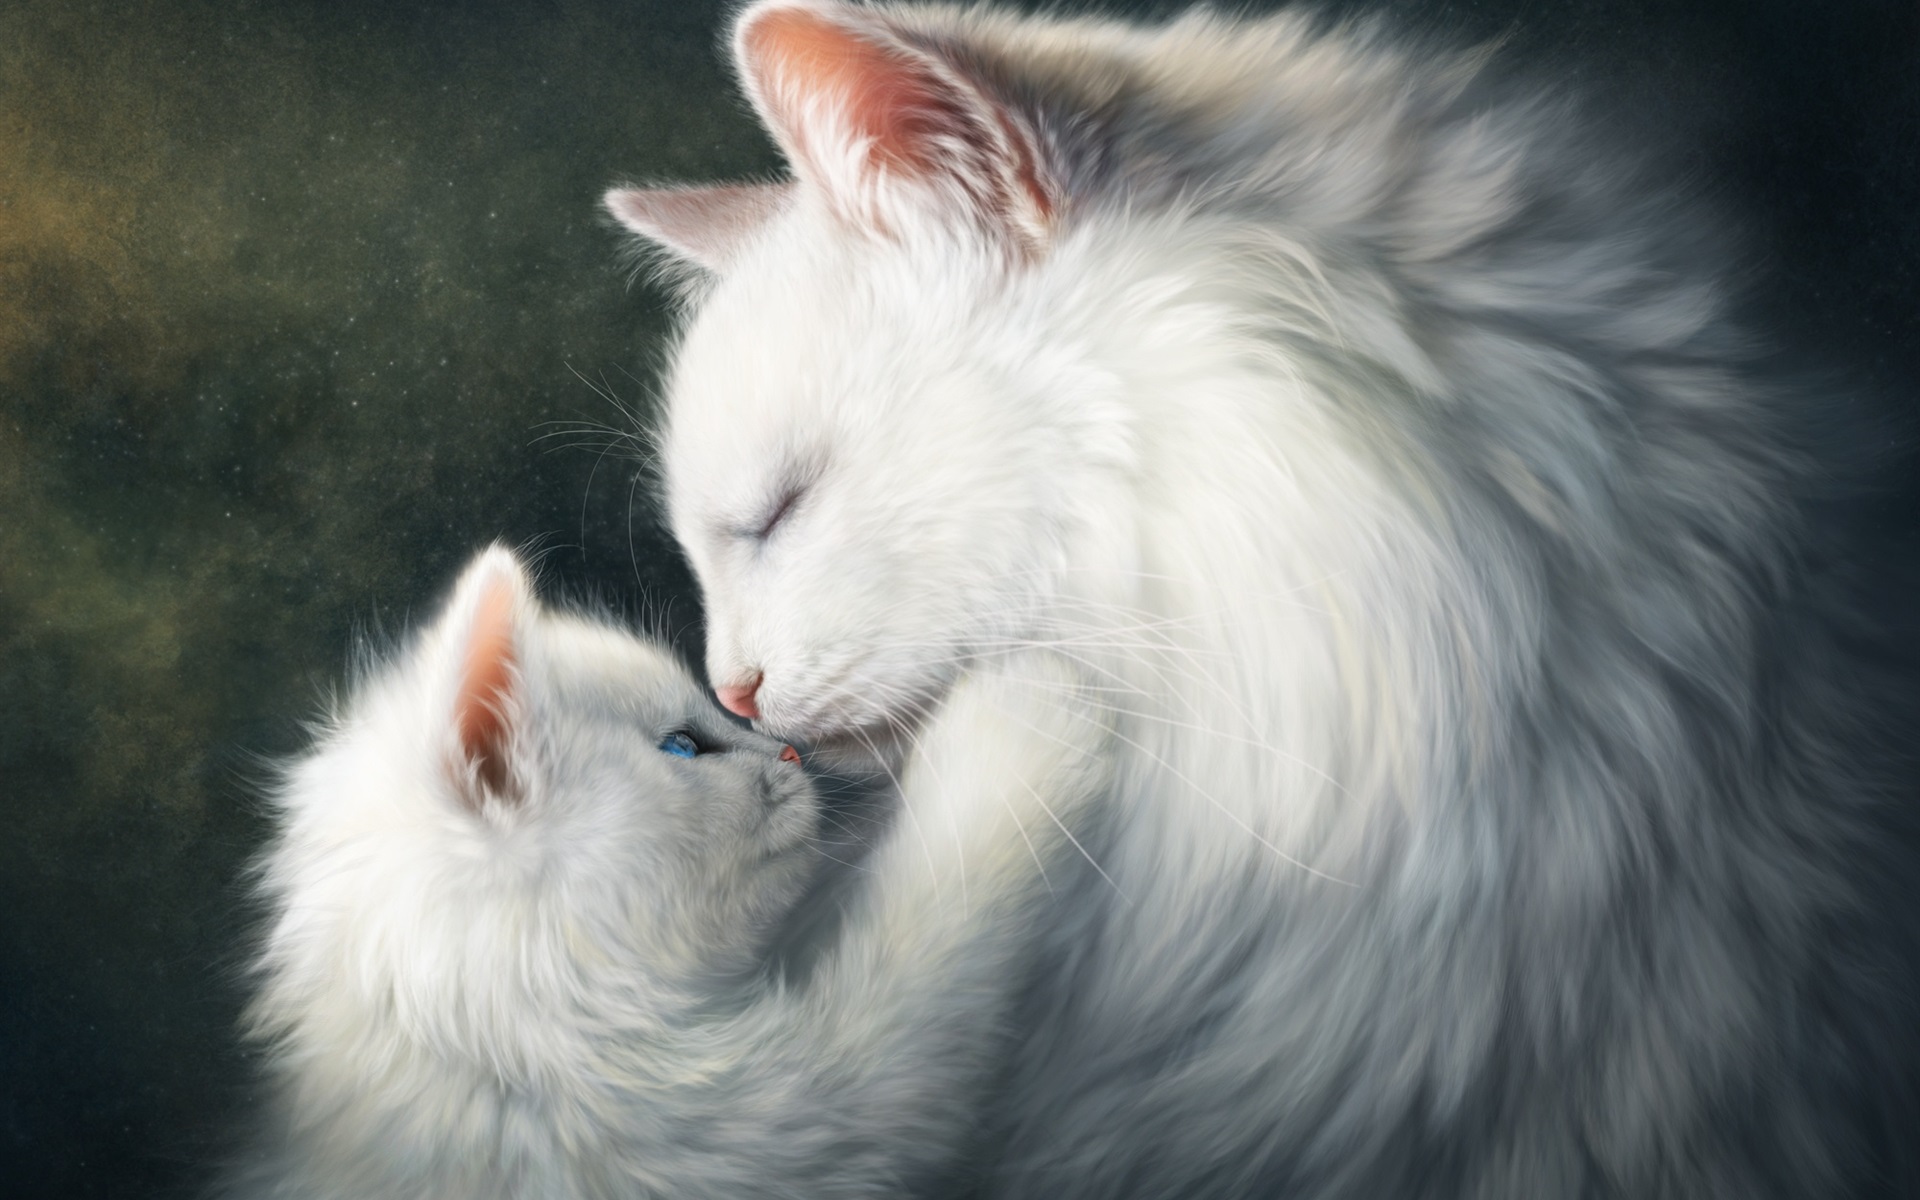 Wallpaper White Cats Mom And Kitten Love Cat Images Hd 19x10 Wallpaper Teahub Io